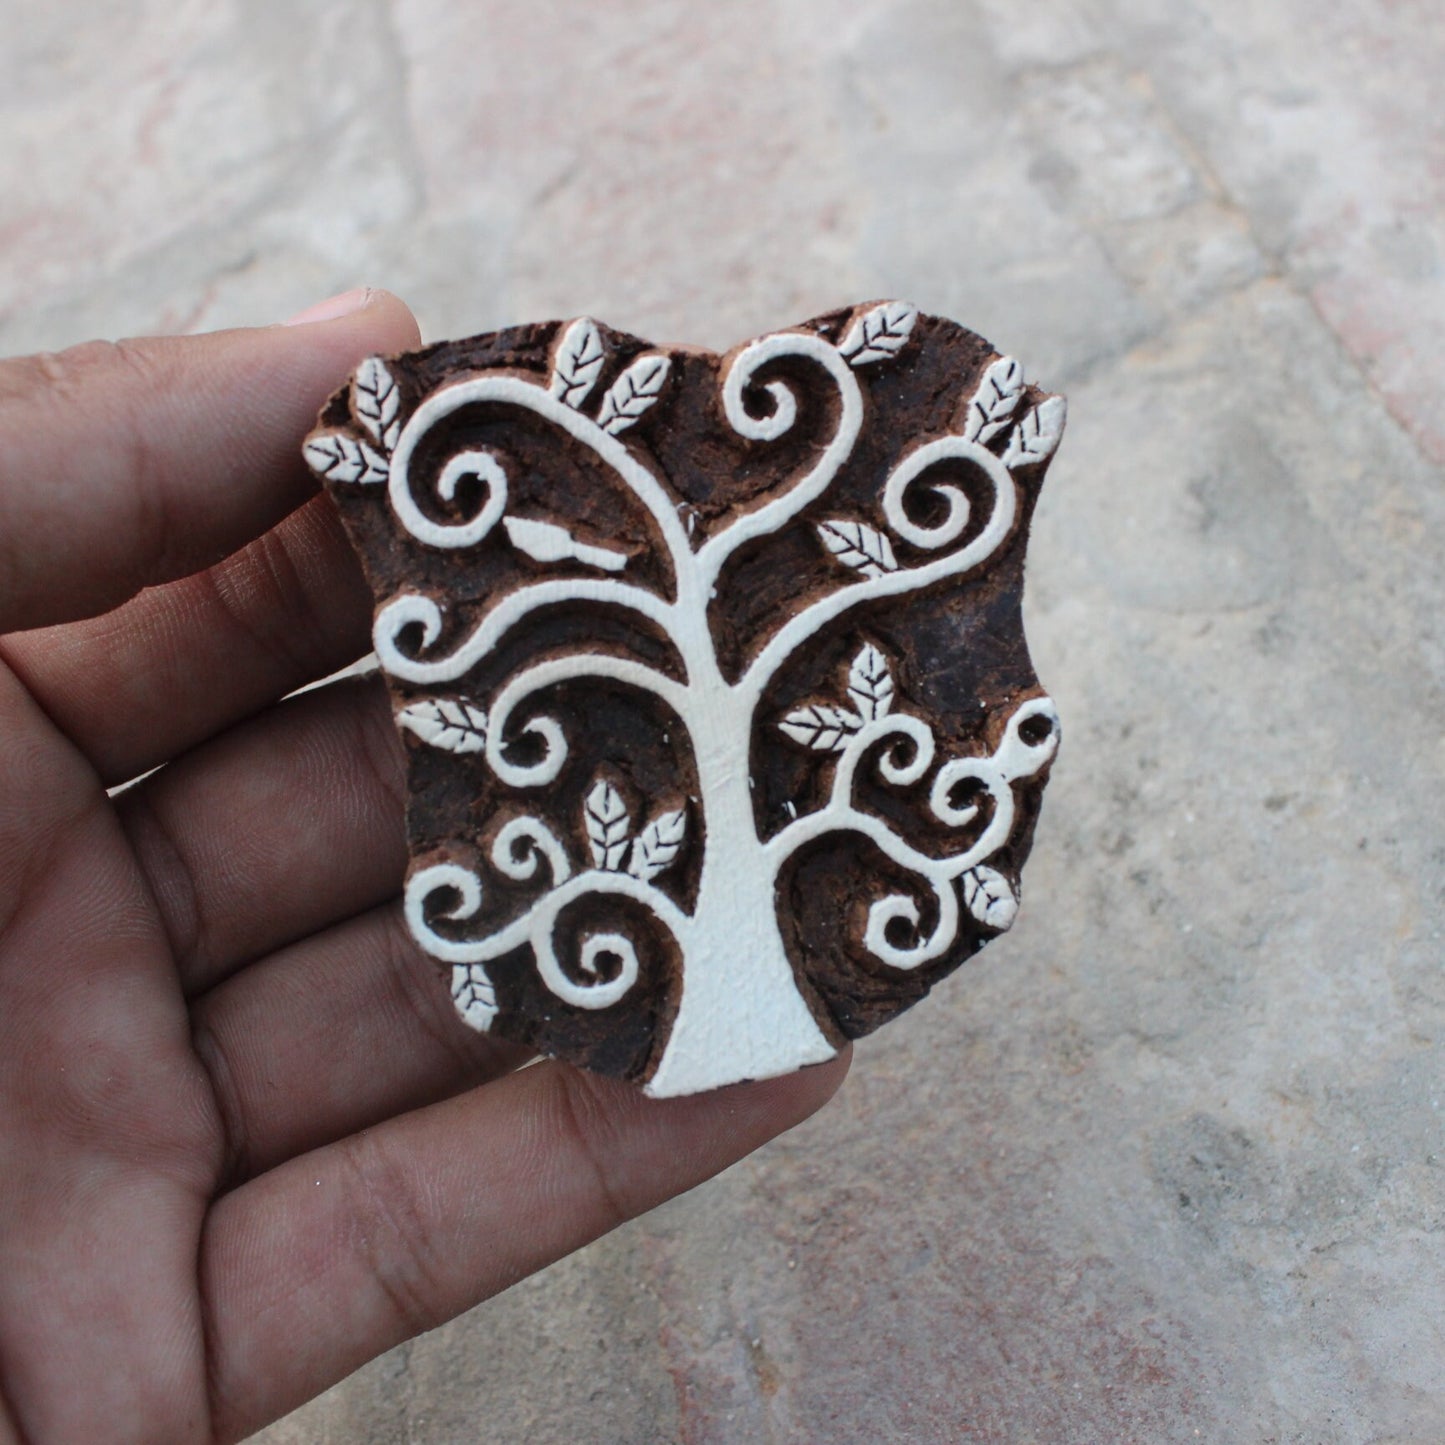 Tree Fabric Stamp Tree Of Life Block Print Stamp Indian Fabric Stamp Hand Carved Textile Printing Block For Printing Kids Craft Soap Stamp